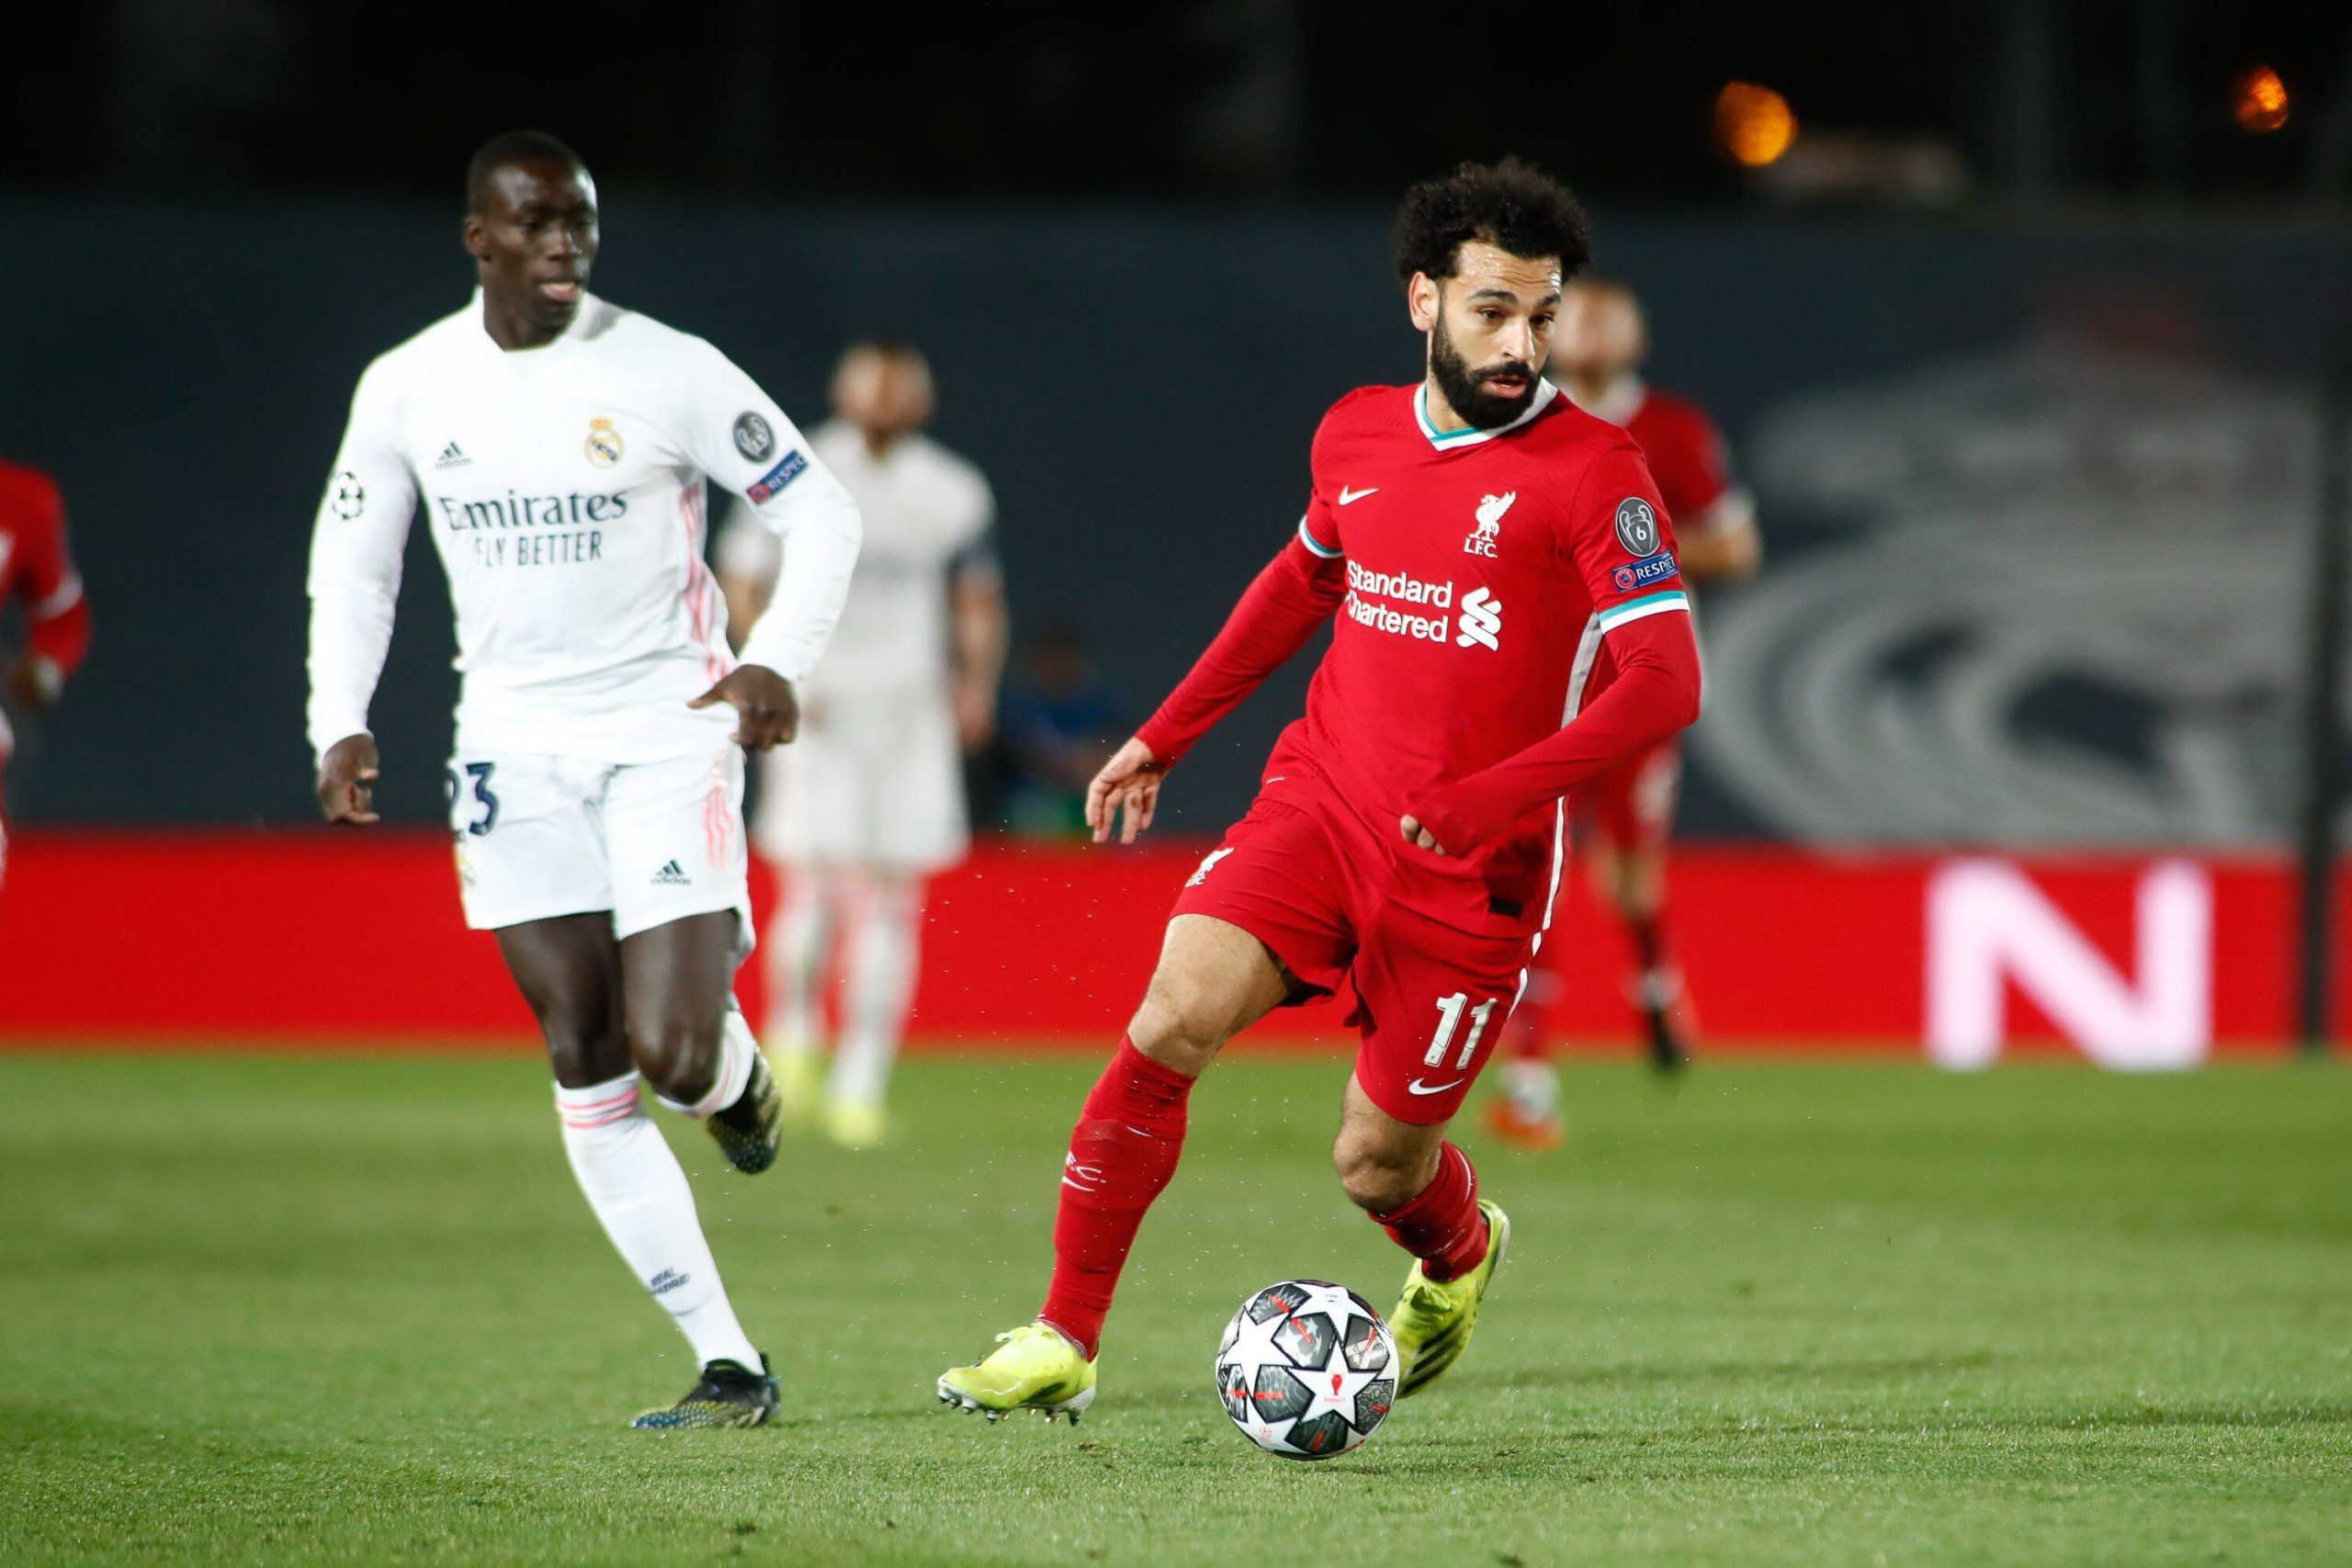 Mandatory Credit: Photo by Oscar J Barroso/Shutterstock (11846871s) Mohamed Salah of Liverpool in action during the UEFA